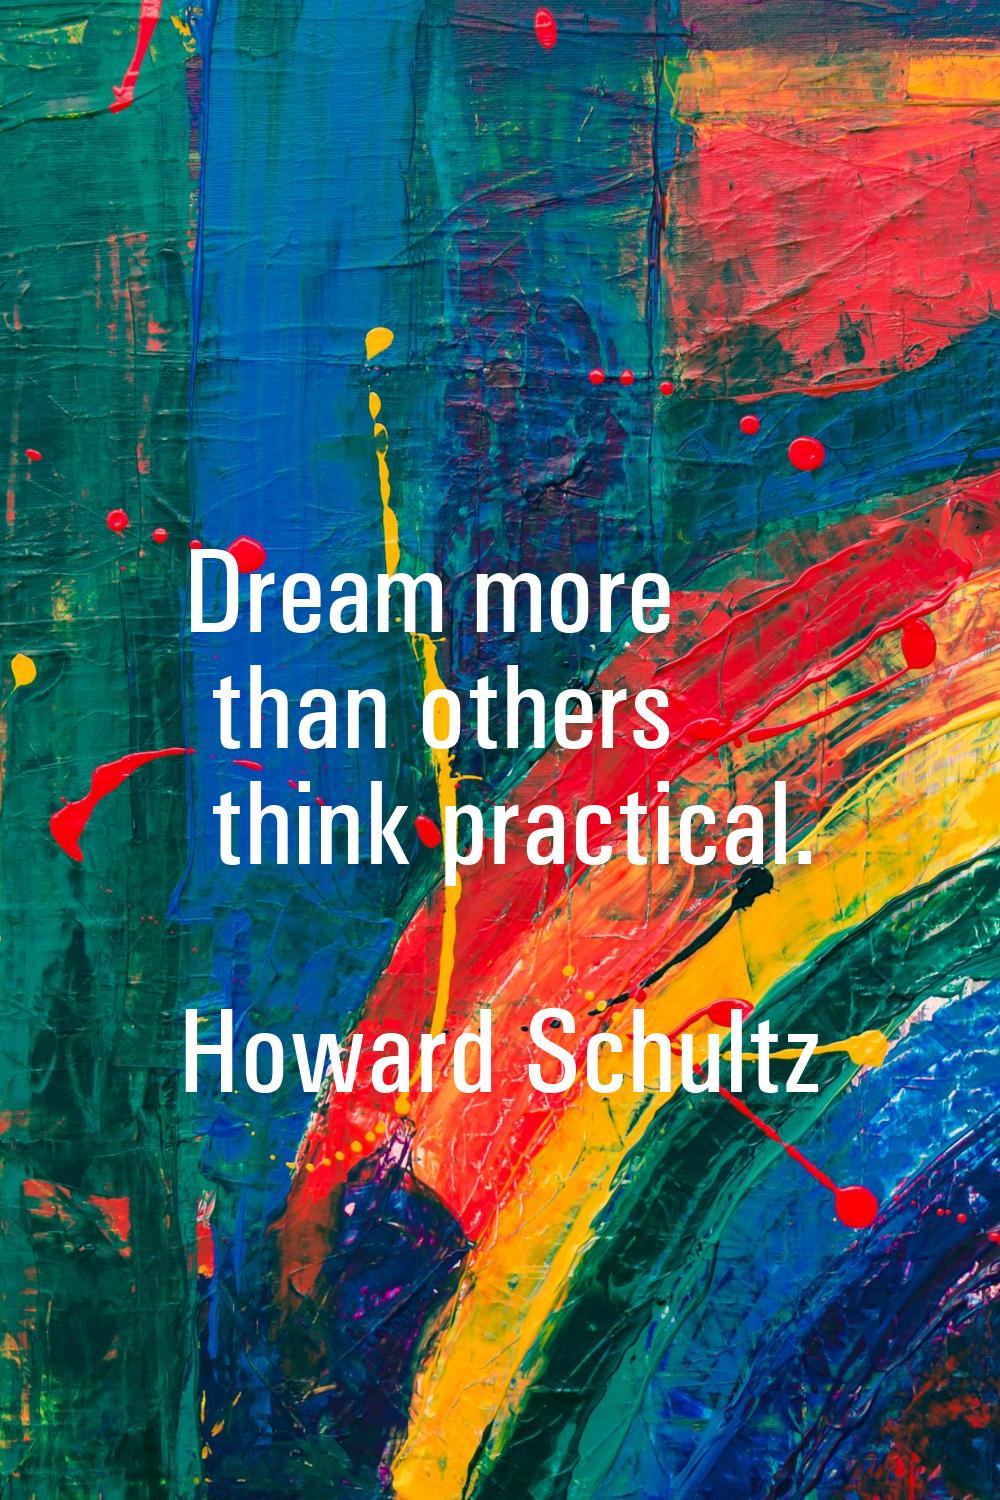 Dream more than others think practical.